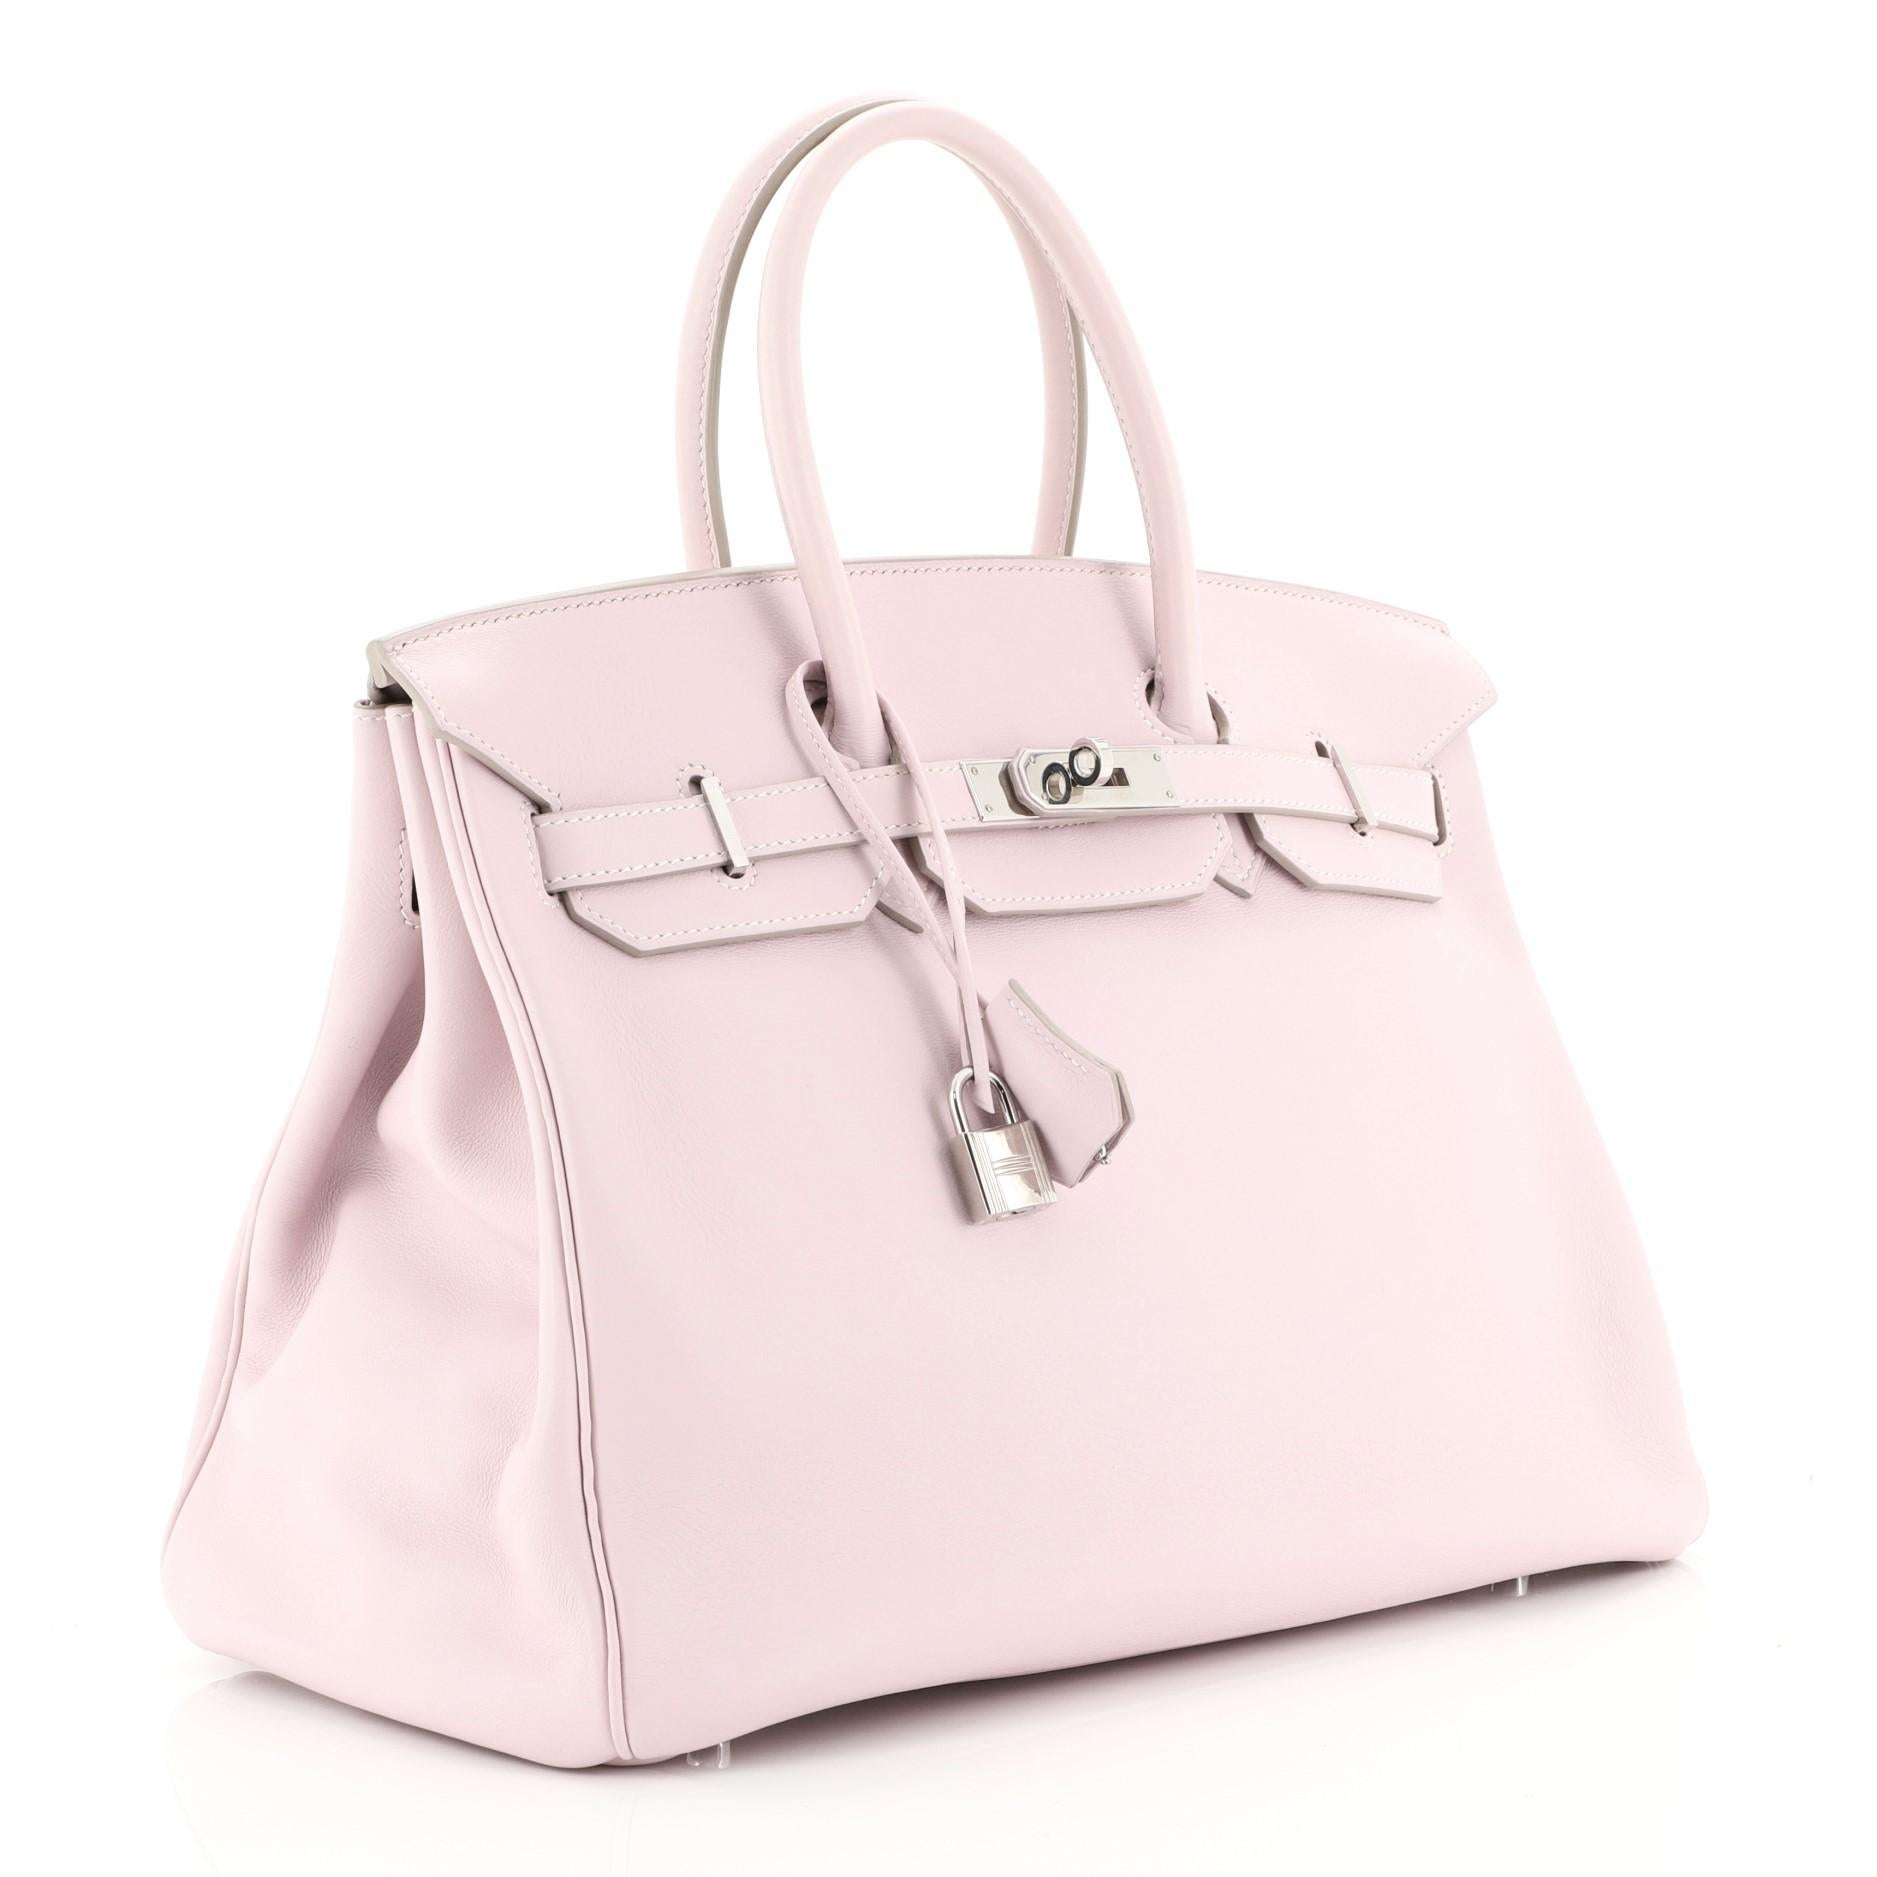 This Hermes Birkin Handbag Rose Dragee Swift with Palladium Hardware 35, crafted in Rose Dragee pink Swift leather, features dual rolled handles, frontal flap, and palladium hardware. Its turn-lock closure opens to a Rose Dragee pink Swift leather